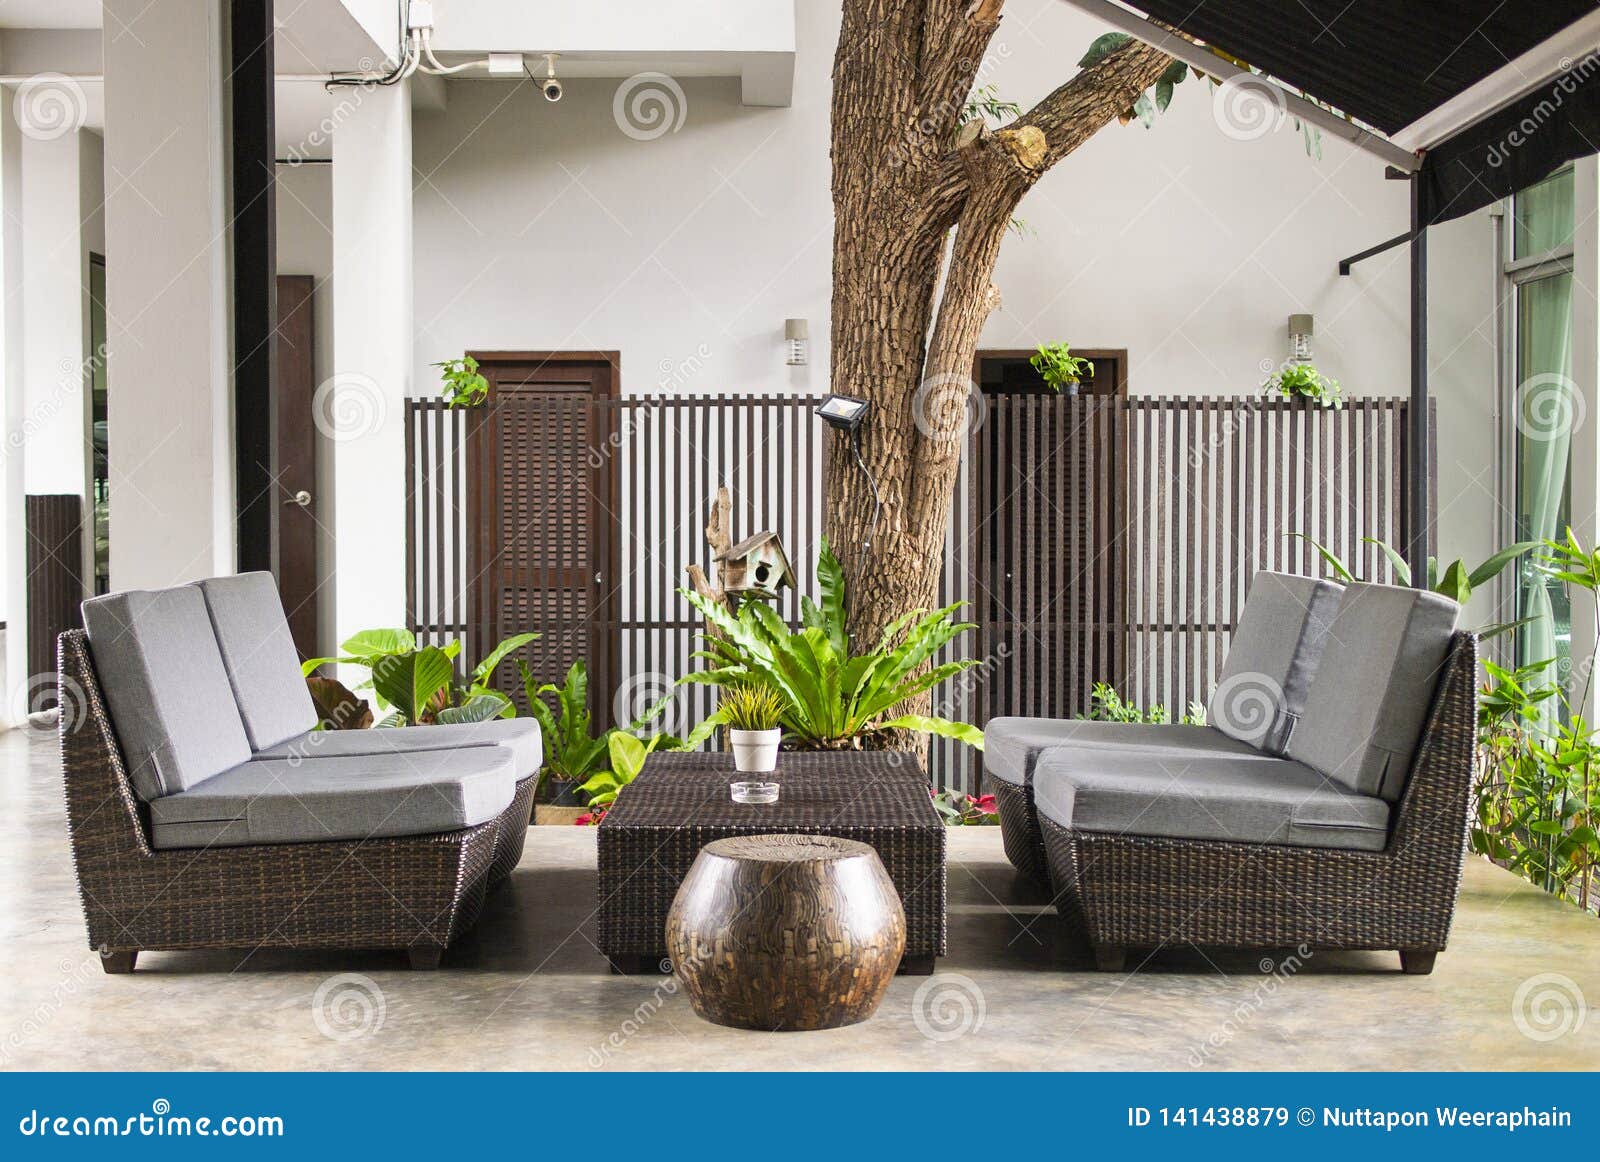 wicker sofa with pillows and table standing on garden terrace by the house